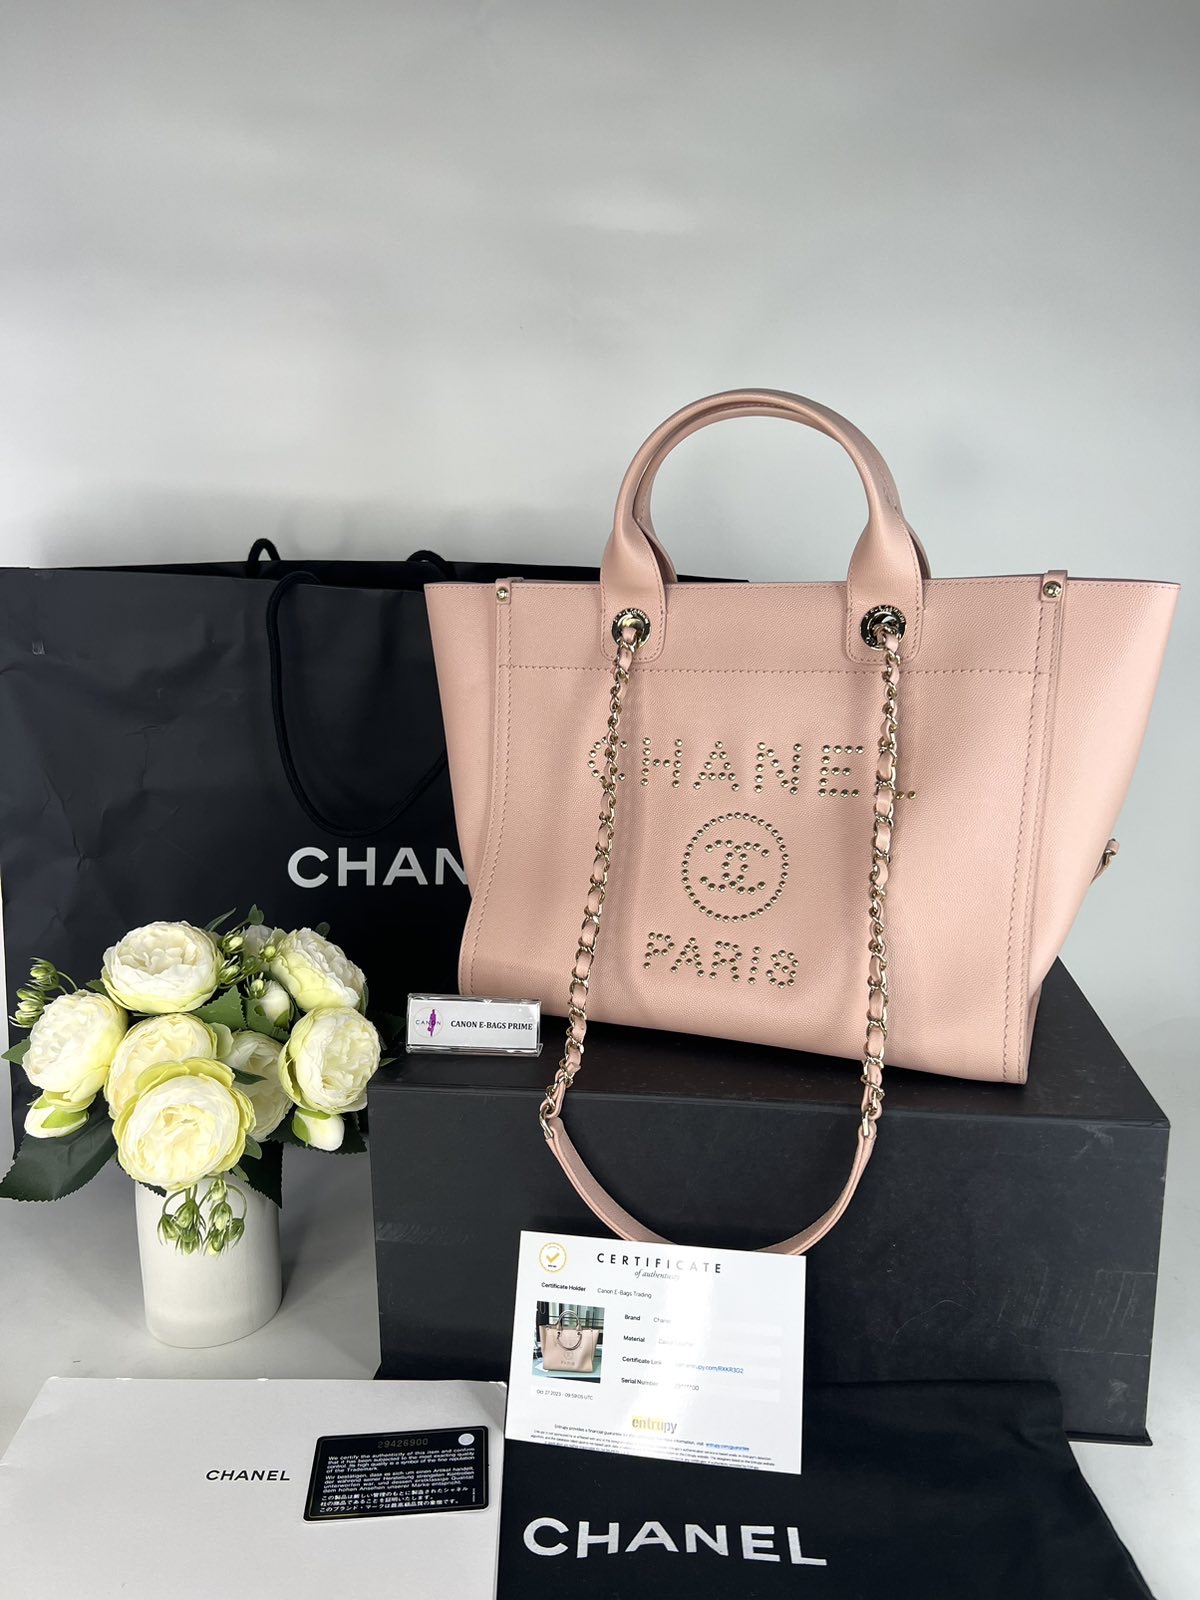 Chanel Medium Studded Deauville Tote Bag Light Pink Caviar Leather